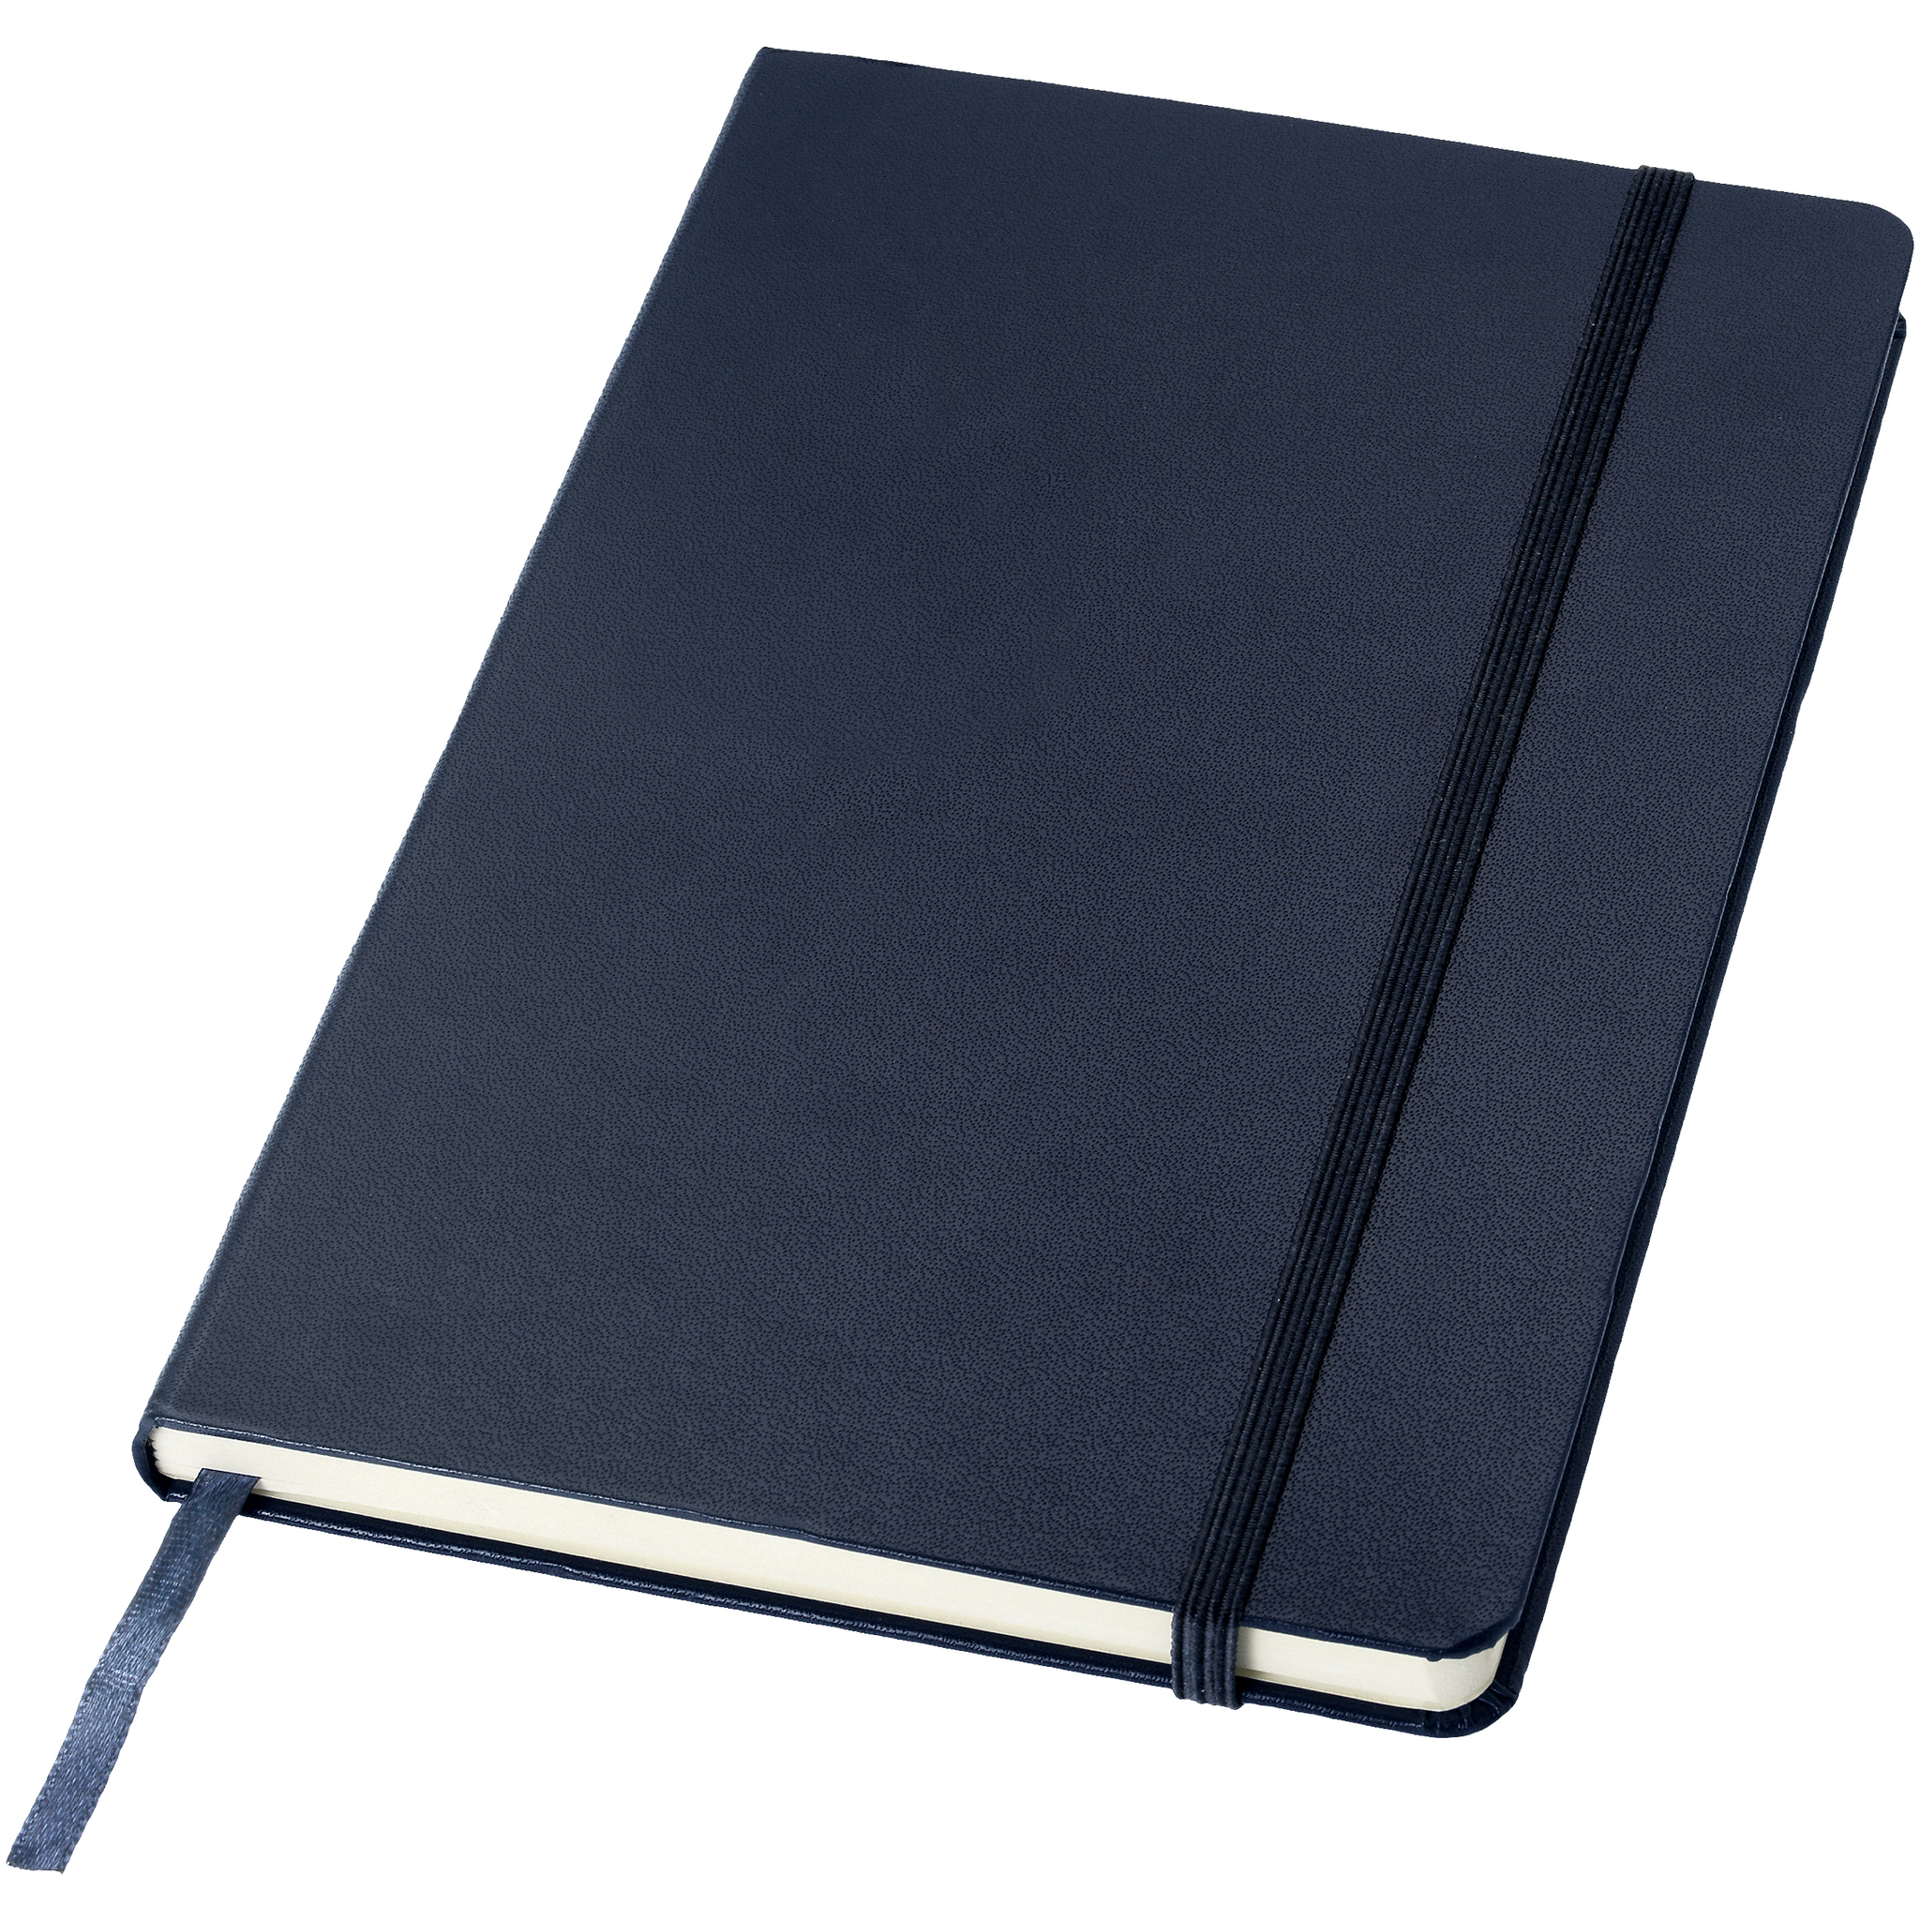 A5 hard cover notebook in navy with navy elastic closure and ribbon